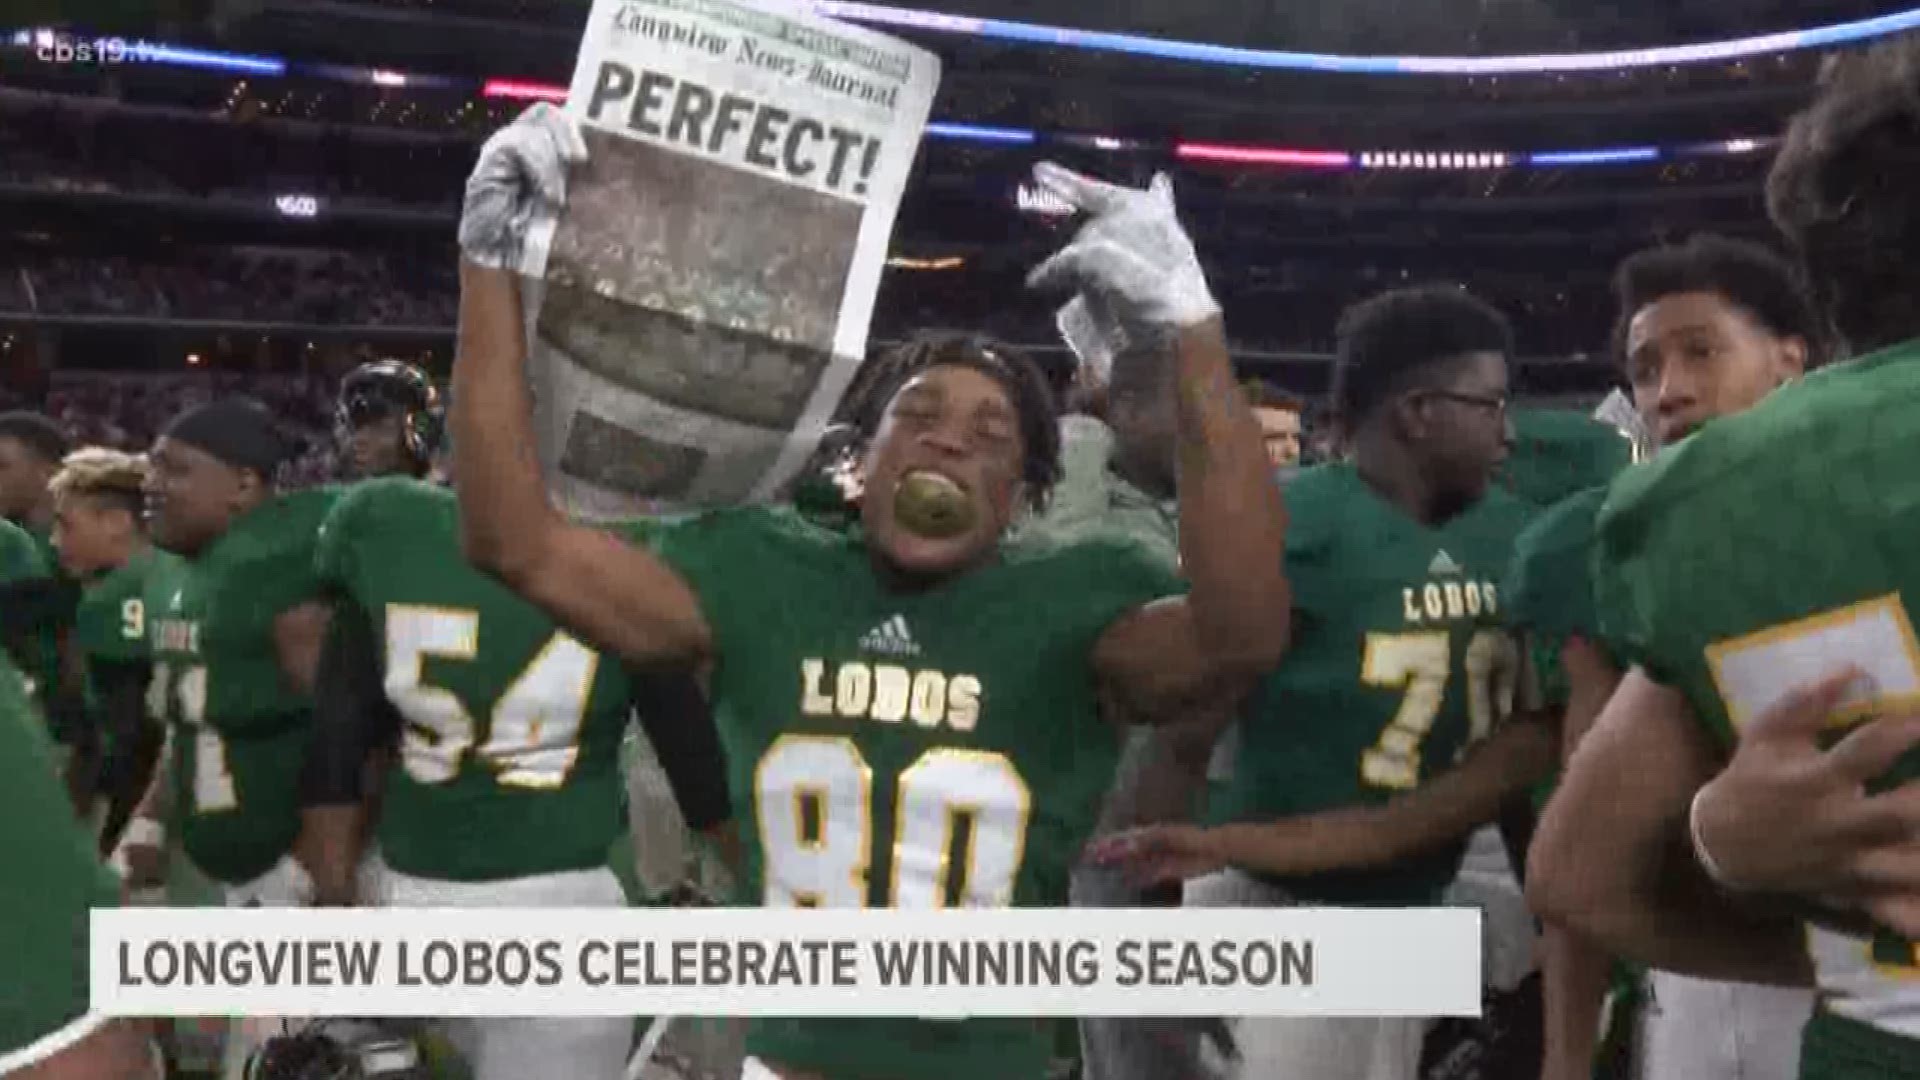 The Longview Lobos are state champions for the first time since 1937, and to celebrate their victory the city will be having a parade for their football team and their long-awaited win. CBS19?s Tim Wolf is in Longview with more.